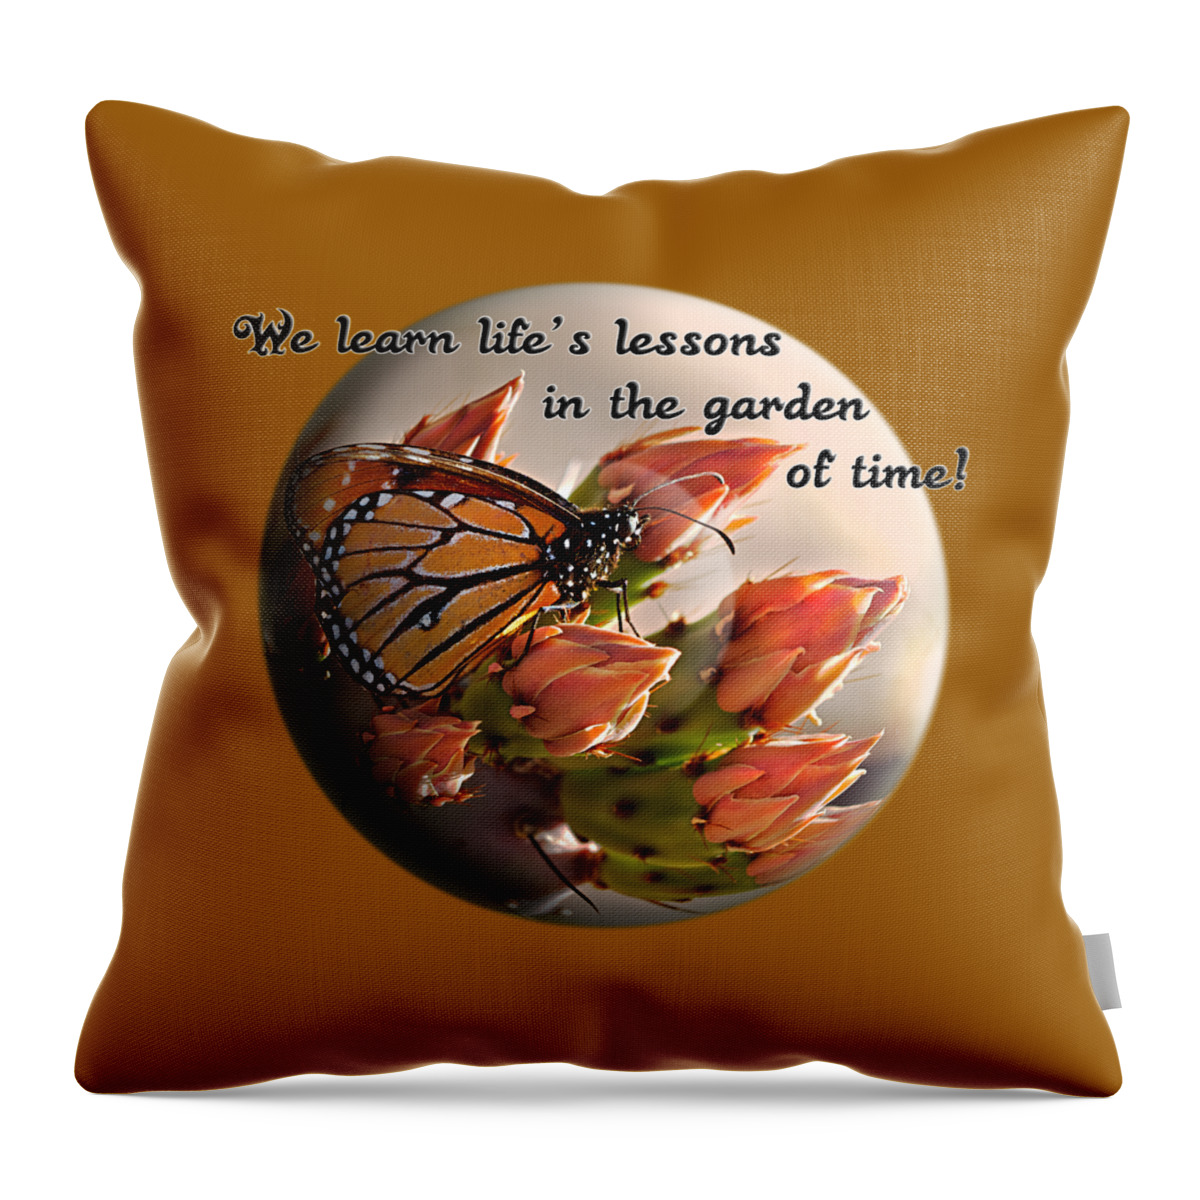 Orb Throw Pillow featuring the photograph Life's Garden by Phyllis Denton